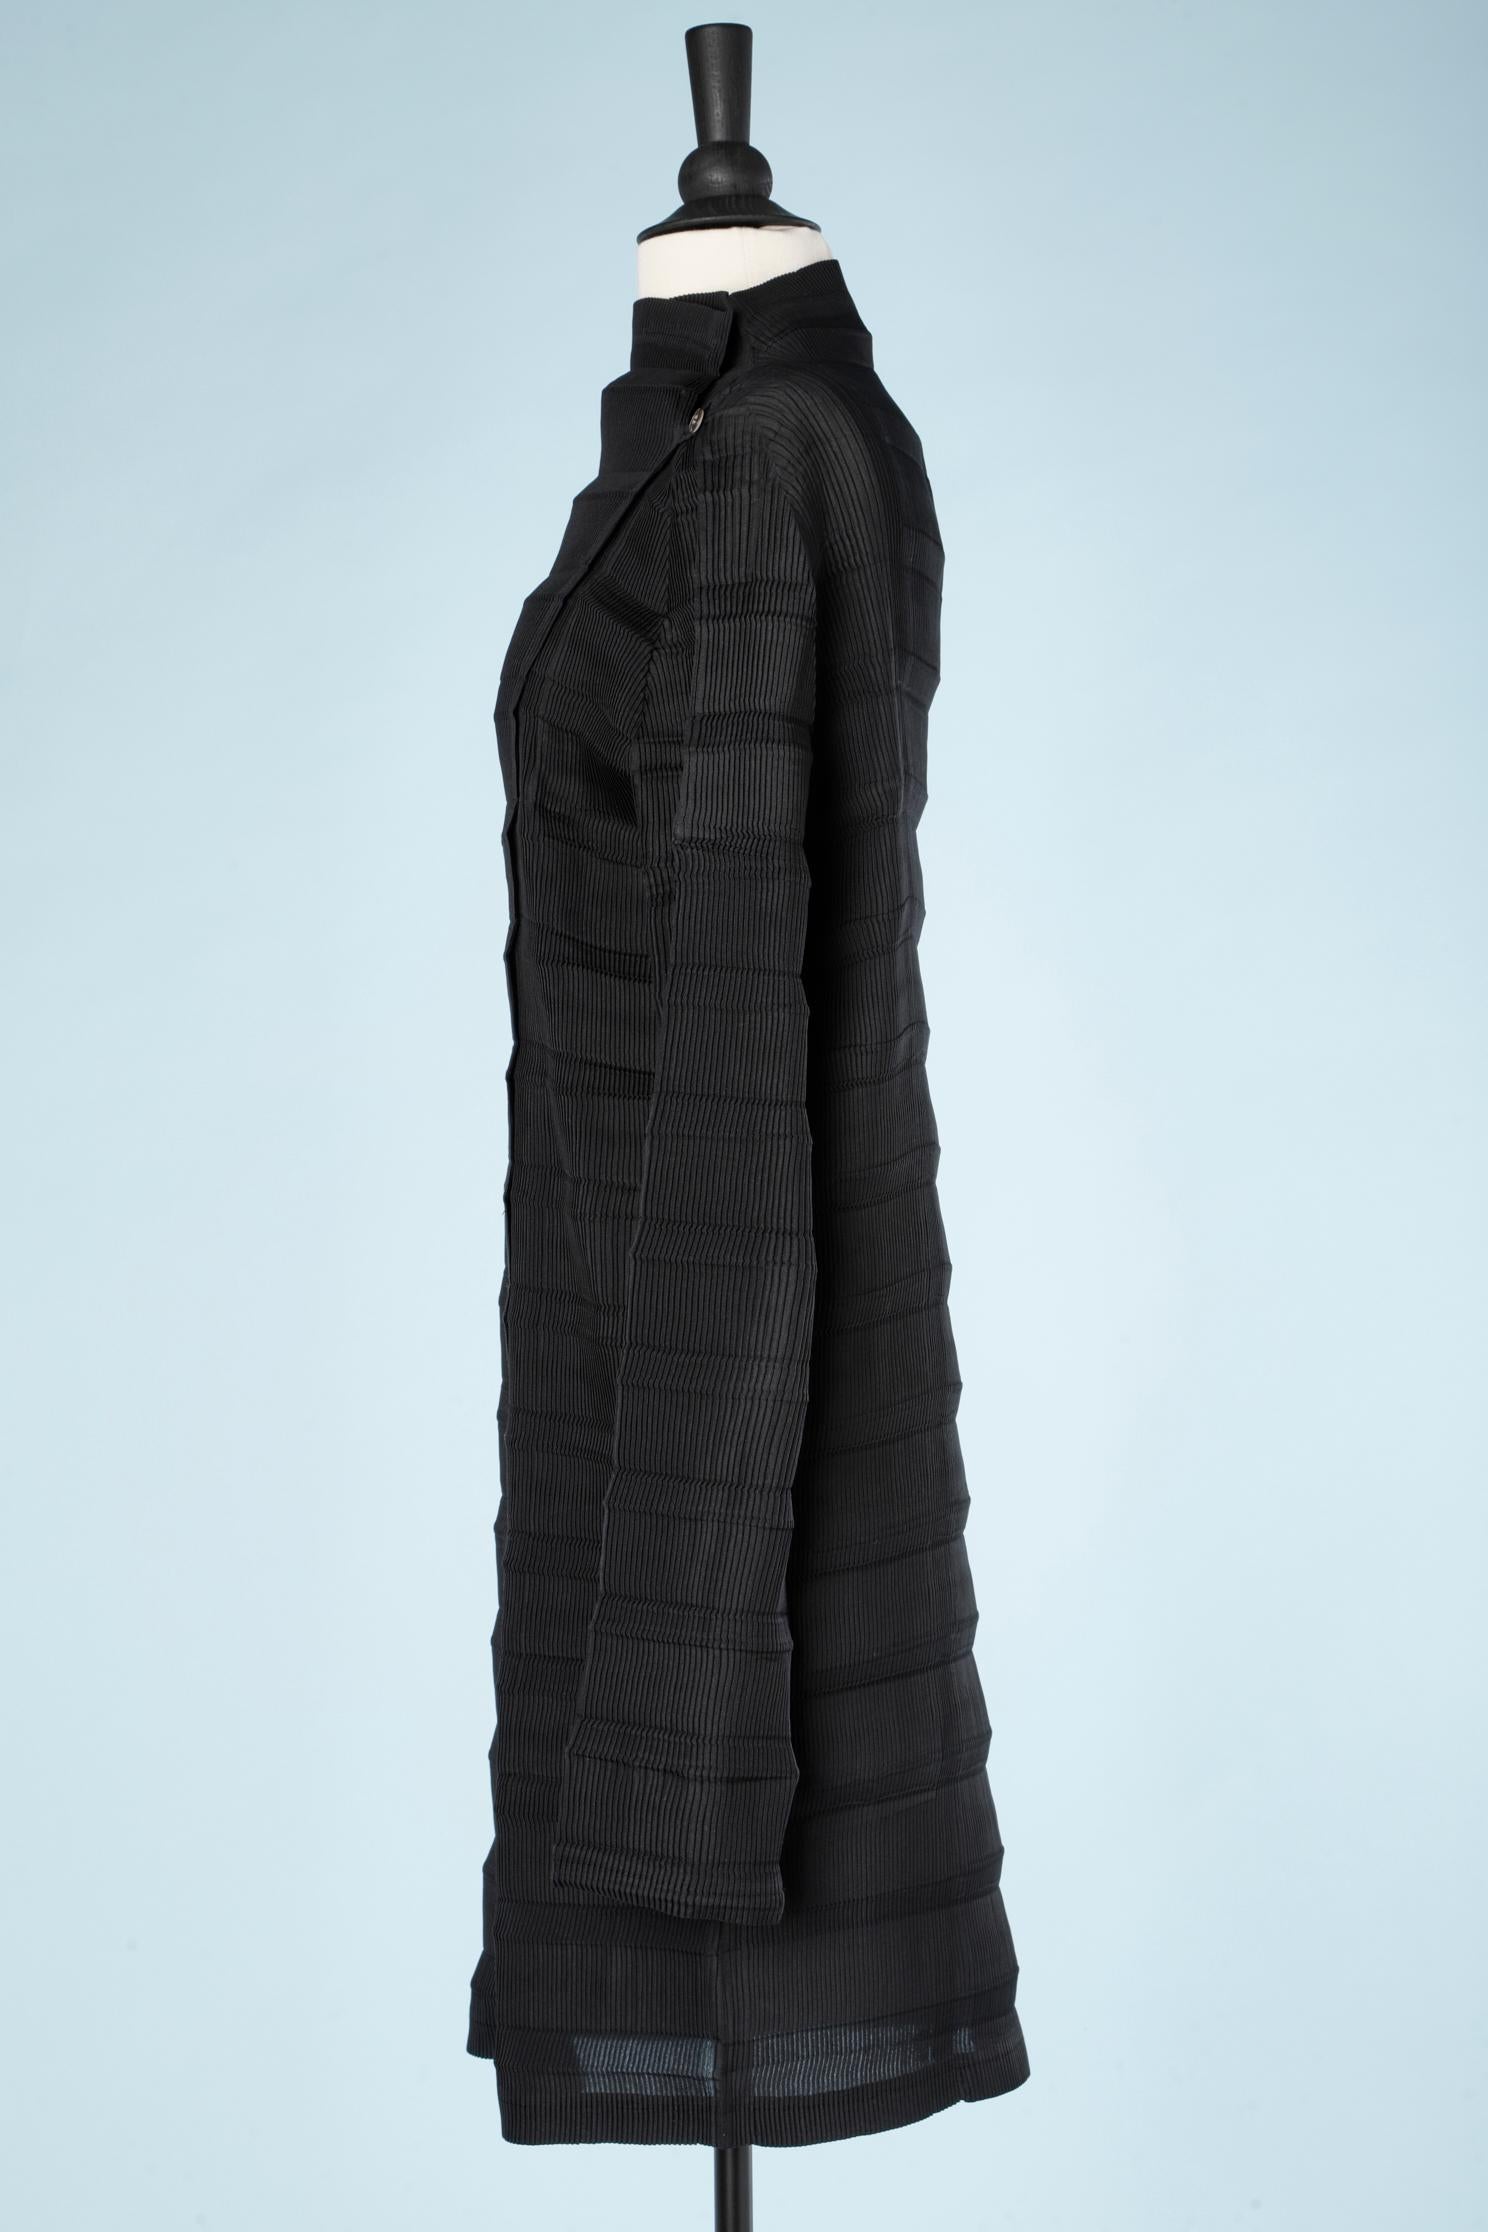 Black long pleated shirt (or dress) double-breasted Issey Miyake  For Sale 1